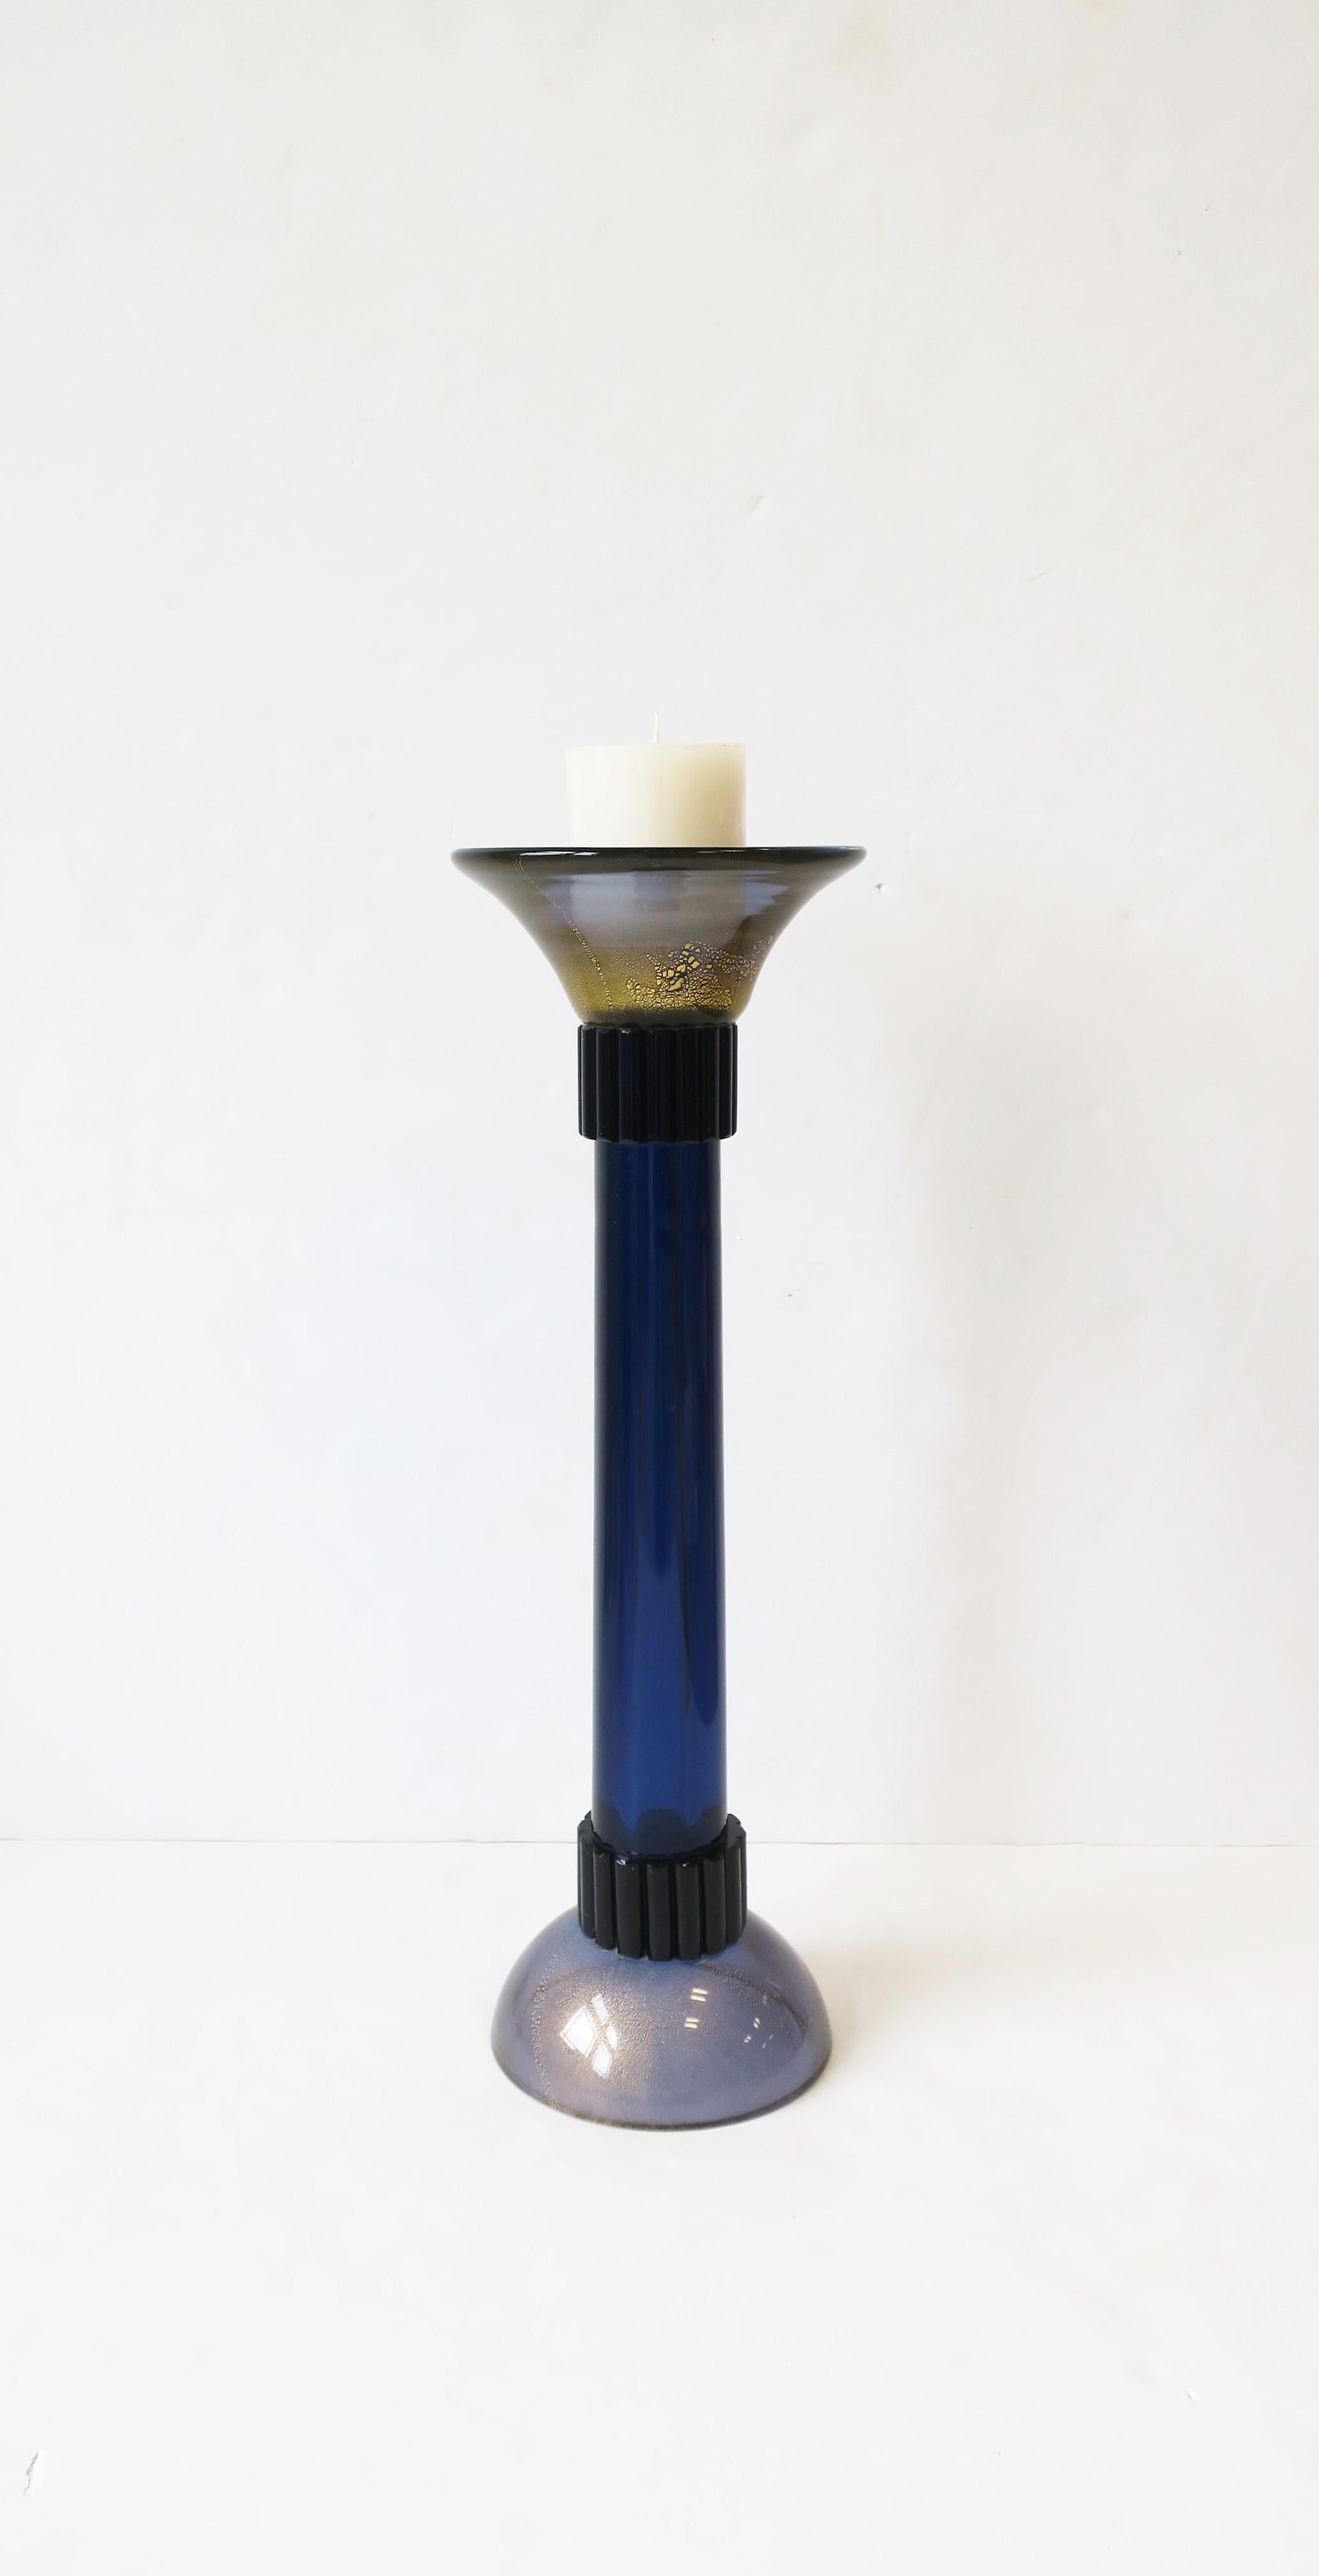 A substantial Modern Italian Murano 'torchiere' art glass candlestick holder, relatively large, made in Italy by Cenedese Vetri, circa late 20th century. A beautiful Modern style statement piece comprised of blue art glass and shimmering gold